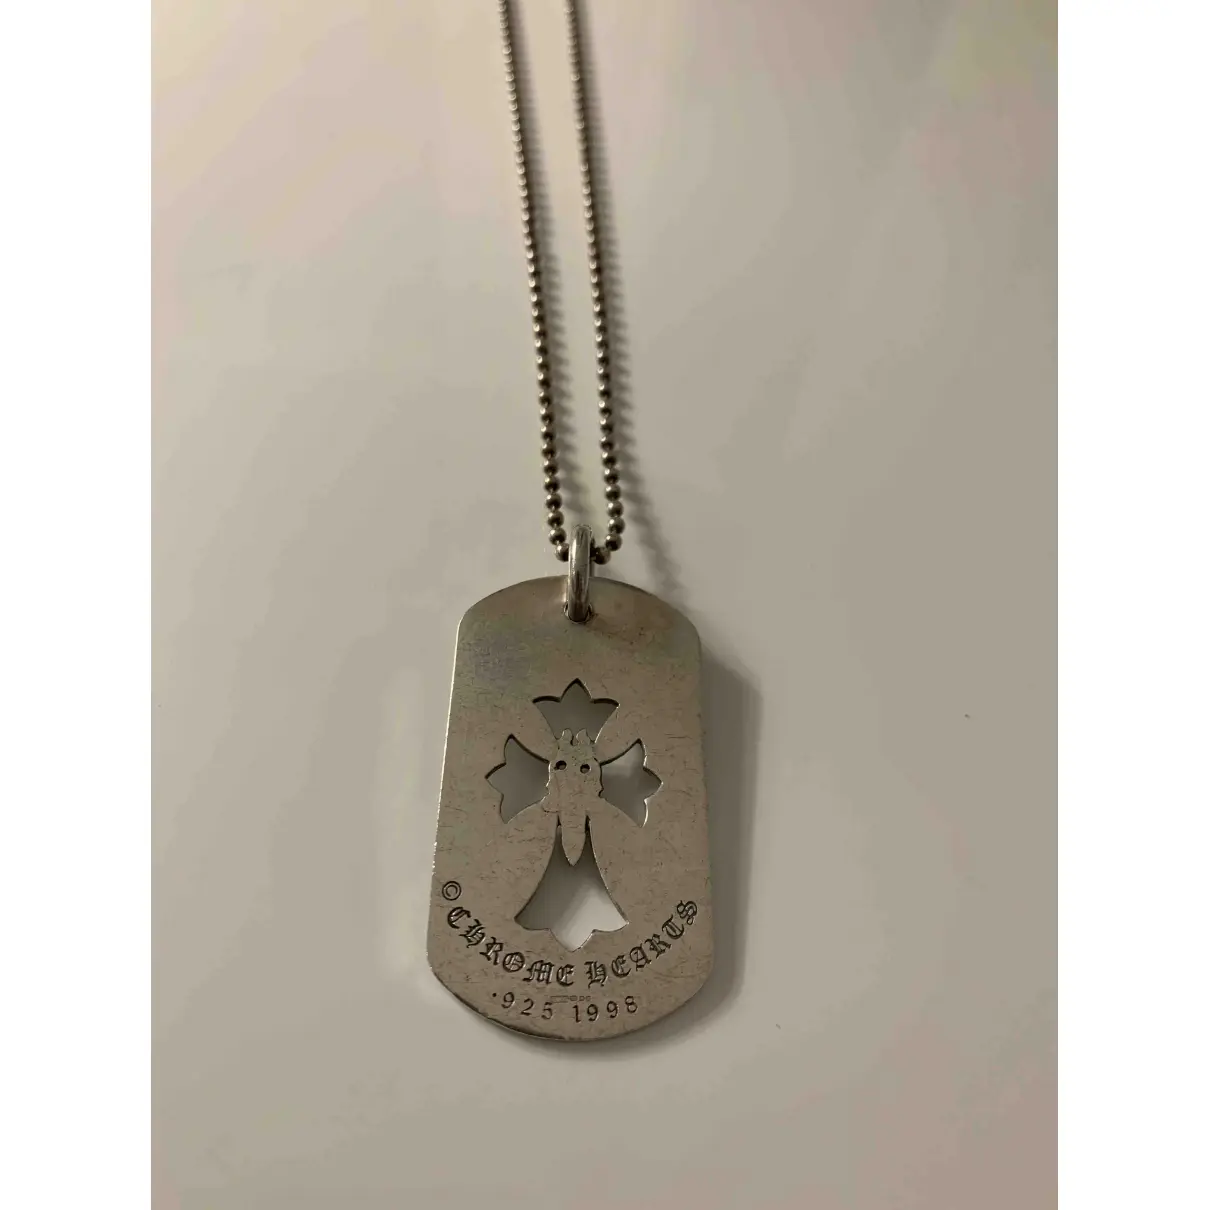 Buy Chrome Hearts Silver necklace online